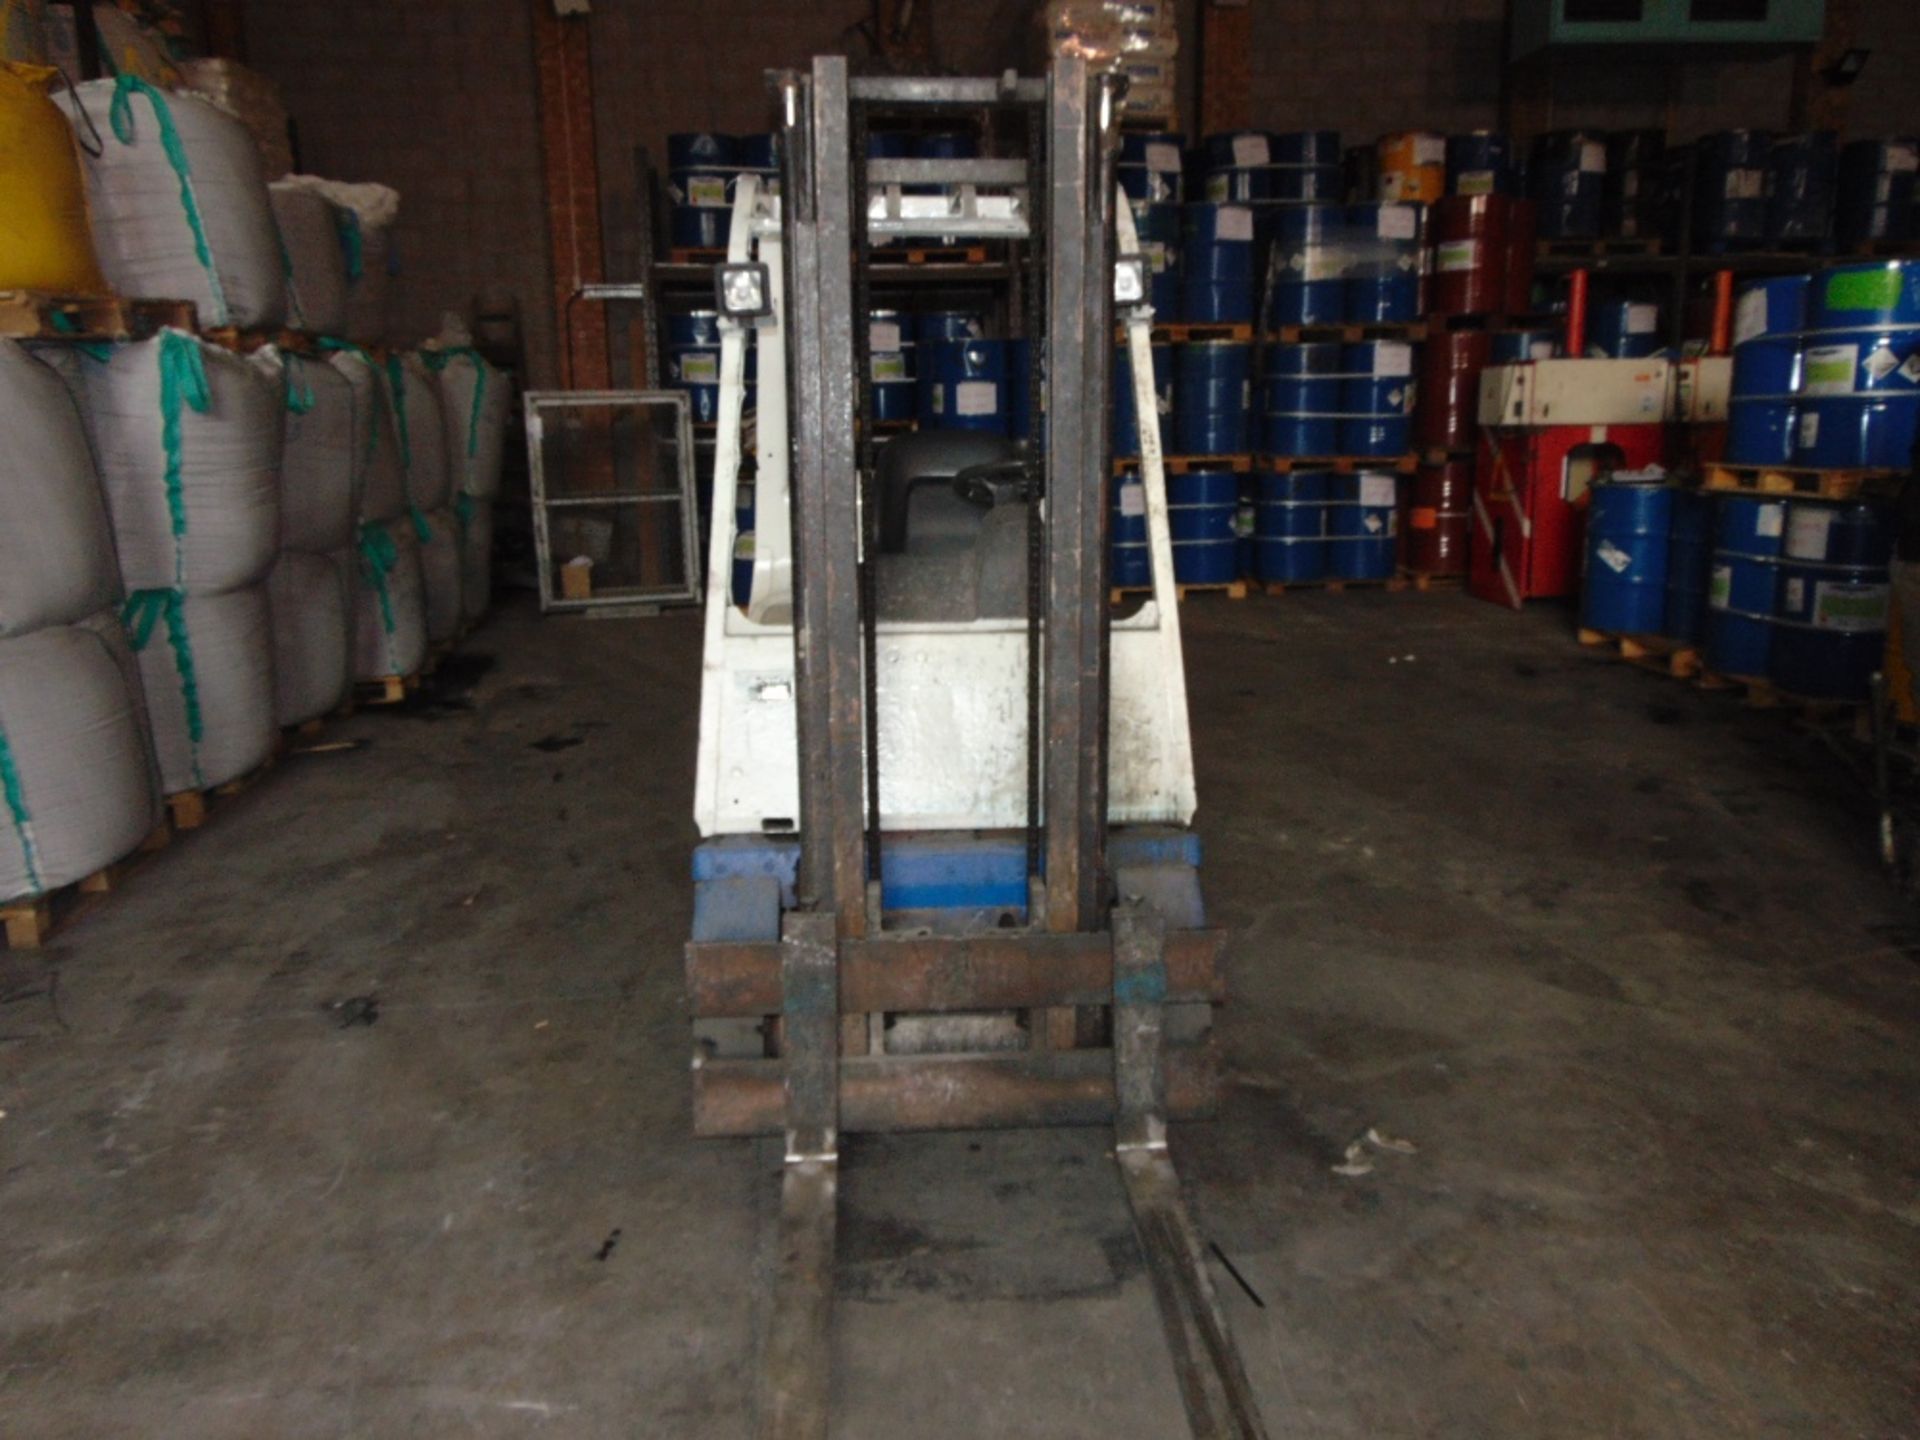 H16P Diesel Forklift Truck, Capacity: 1600Kg, Hours: 4617, Year of Manufacture: 1995 - Image 2 of 3